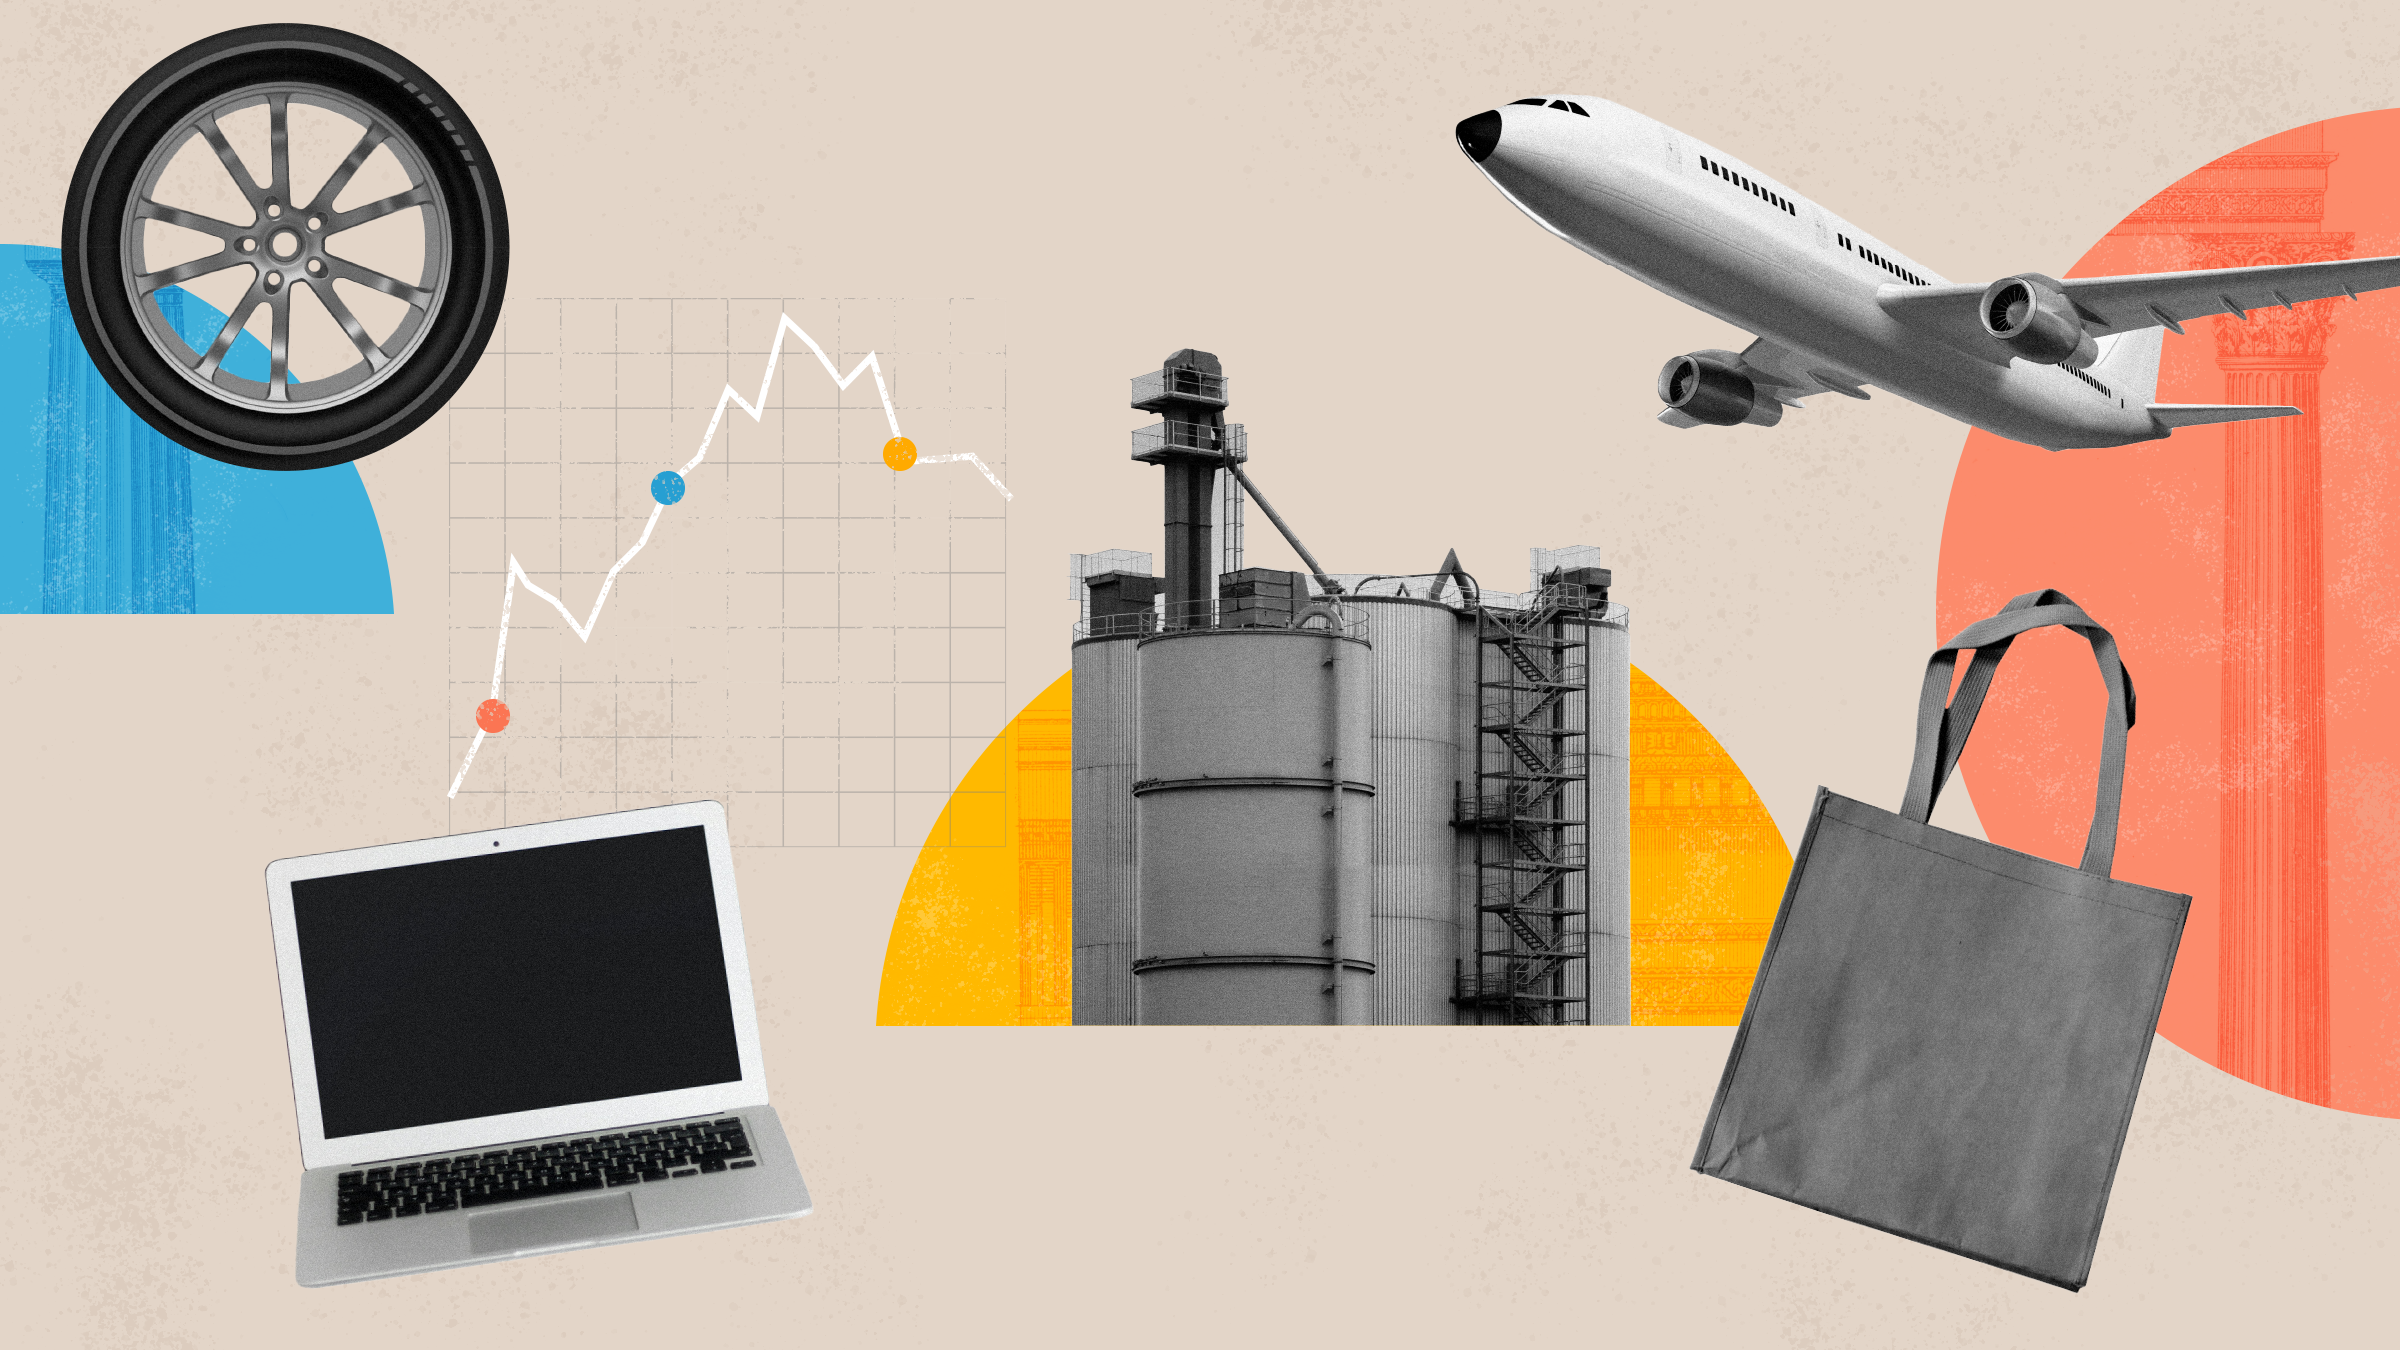 Collage with factory, plane, computer, tire, and shopping bag to represent the state of economy.